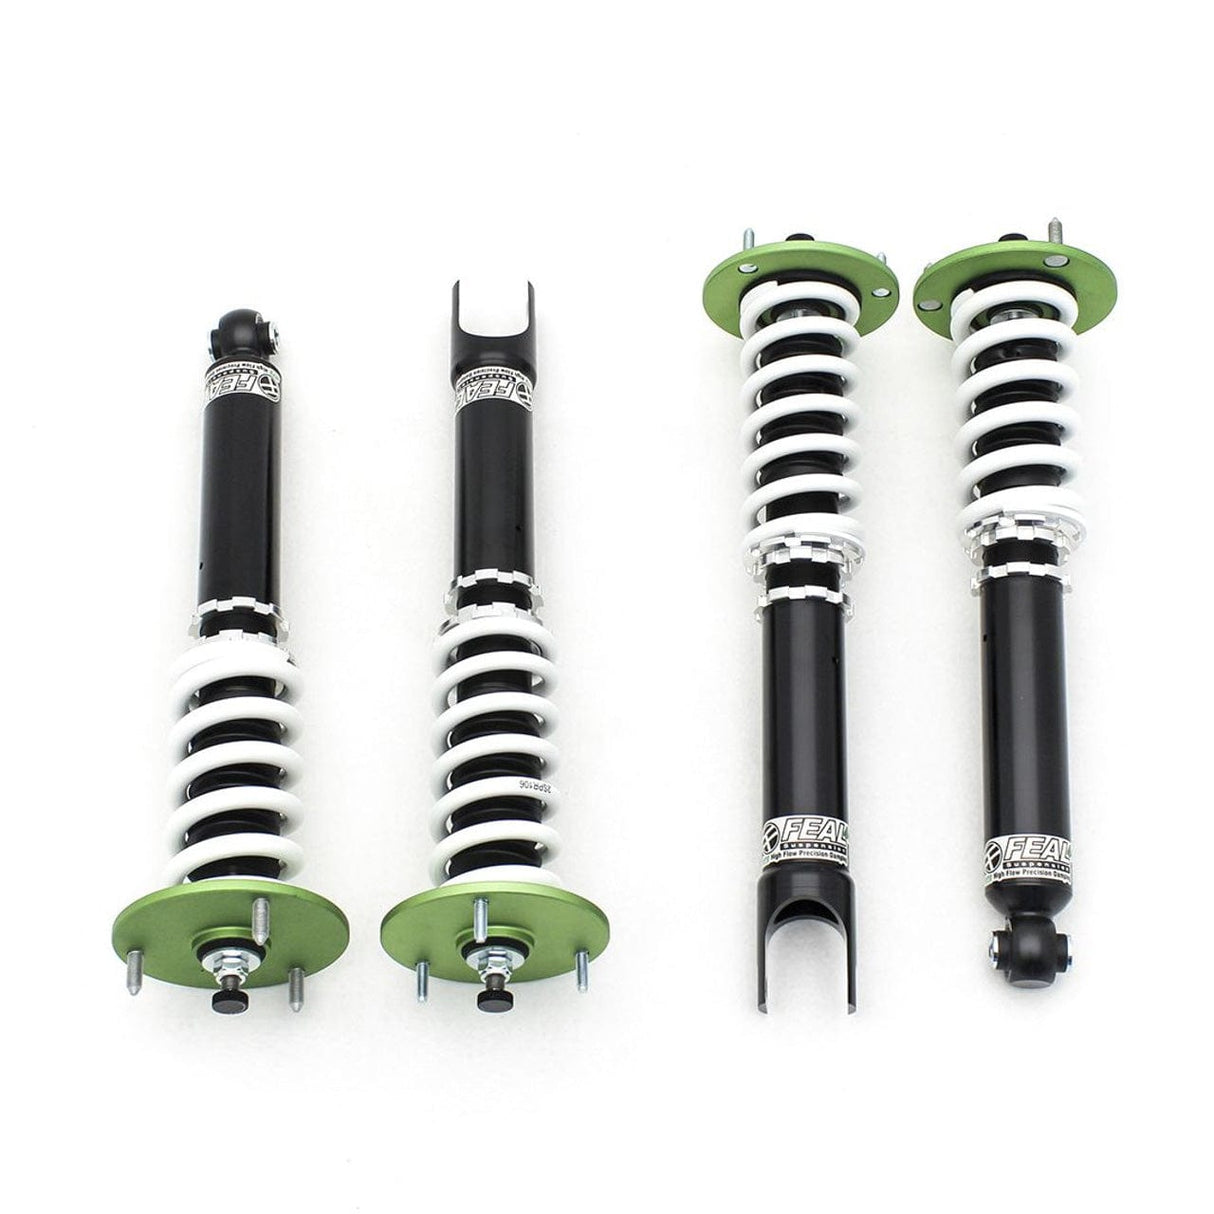 Feal 441 Coilovers (True Rear) - 1983-1987 Toyota Corolla AE86 w/Front Spindles